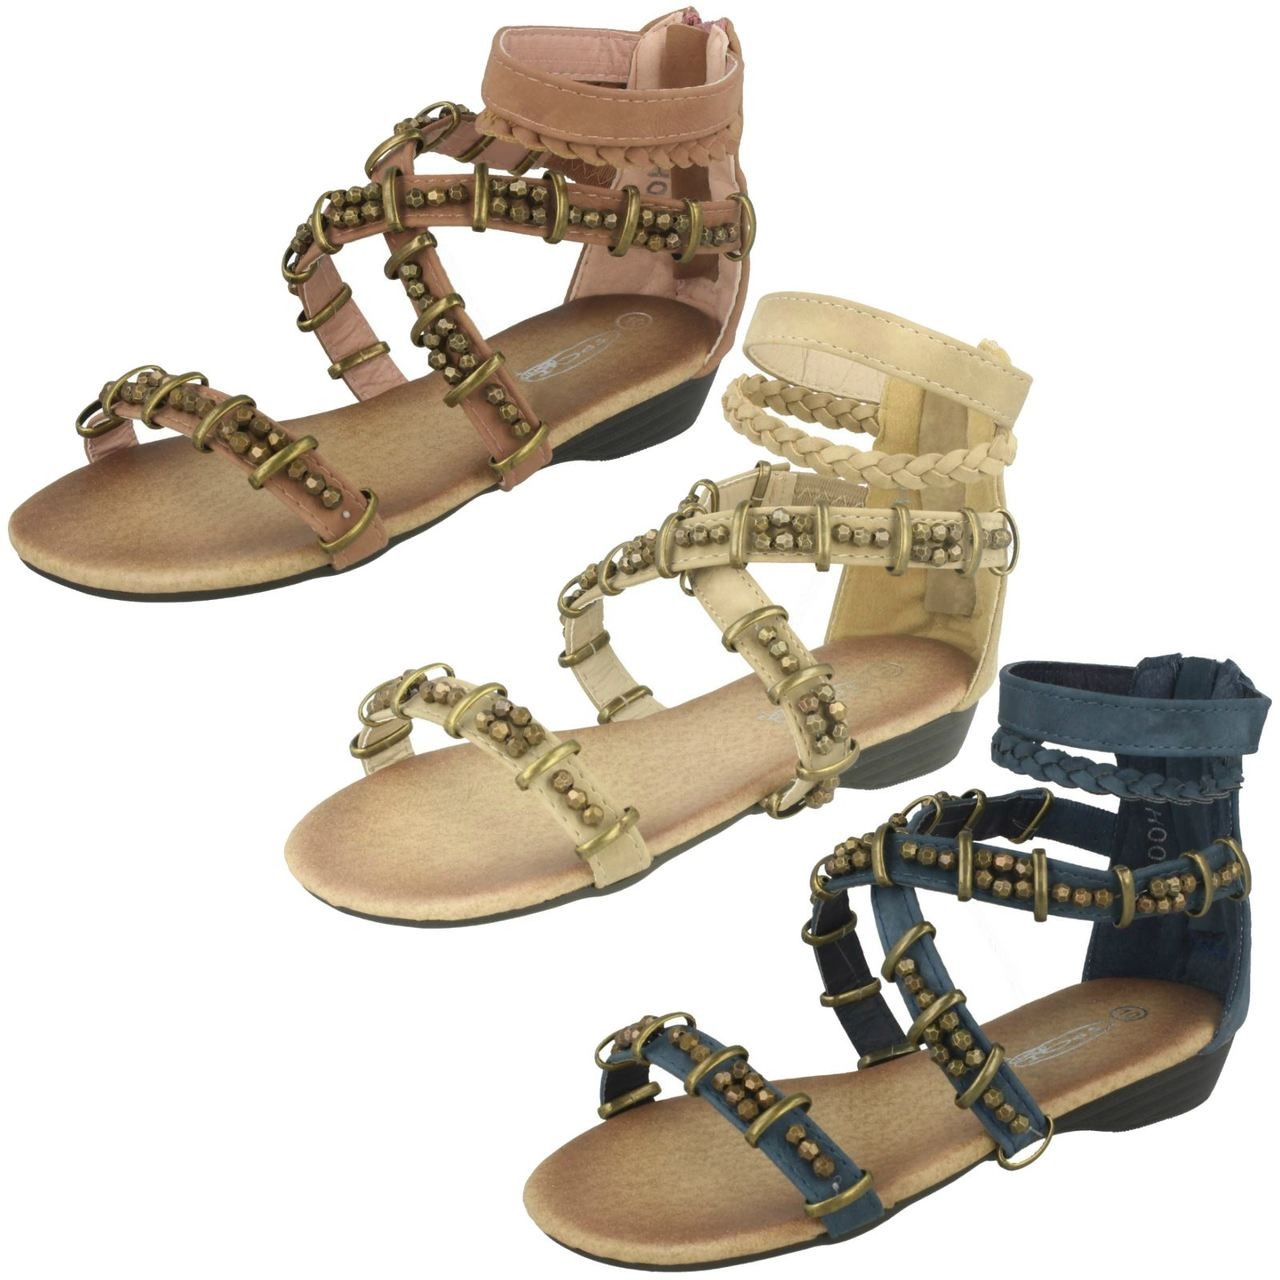 Women's Ladies Vintage Crystal Outdoor Hollow Out Zip Up Sandals Shoes  Roman Shoes Open Toe Beach Shoes Sandalias Mujer - Women's Sandals -  AliExpress